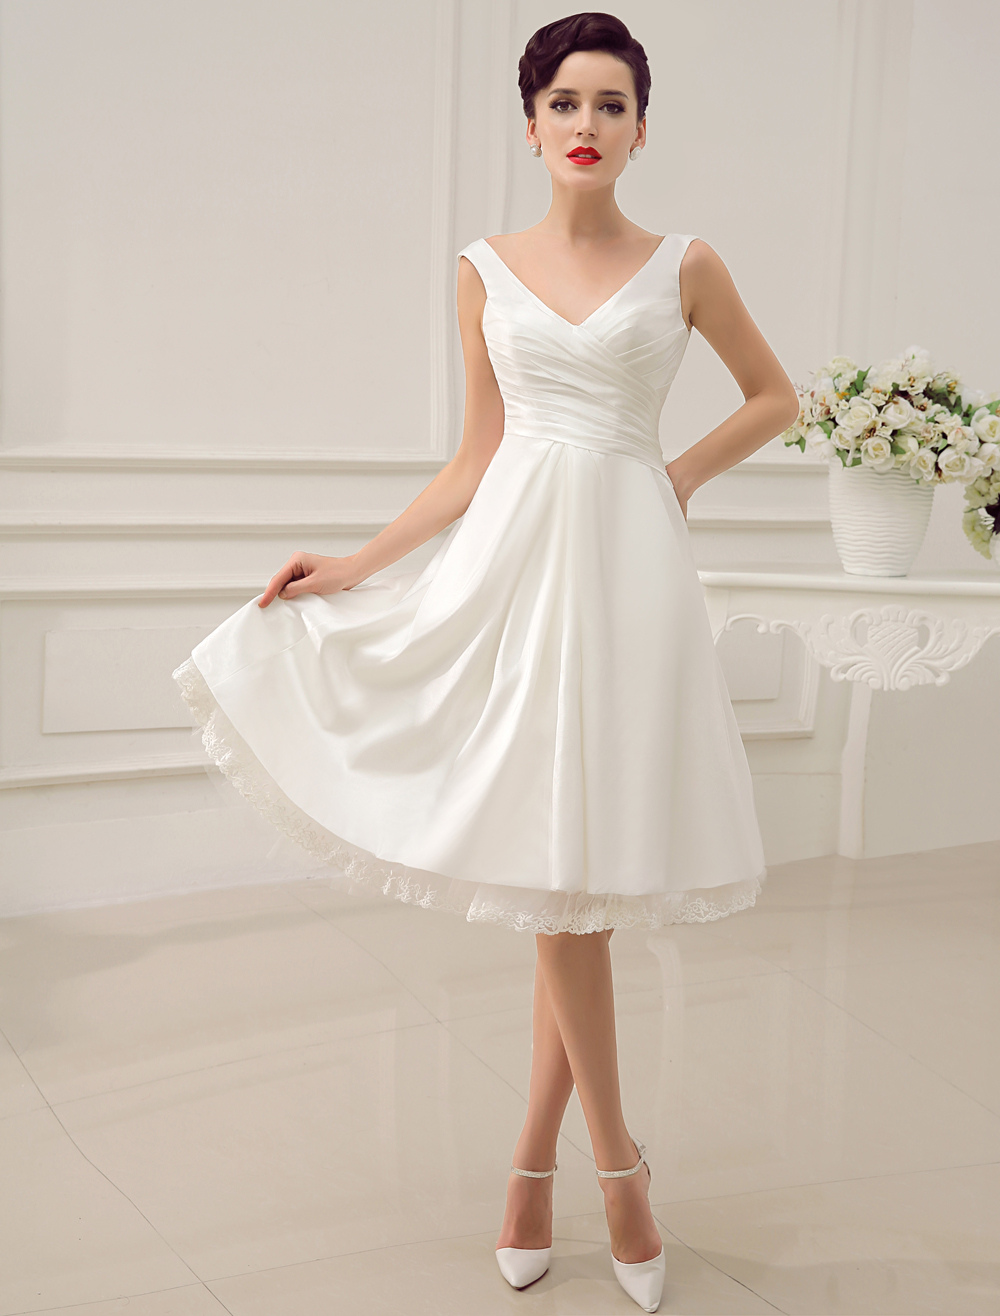 Great Simple Lace Wedding Dress Uk of all time Learn more here ...